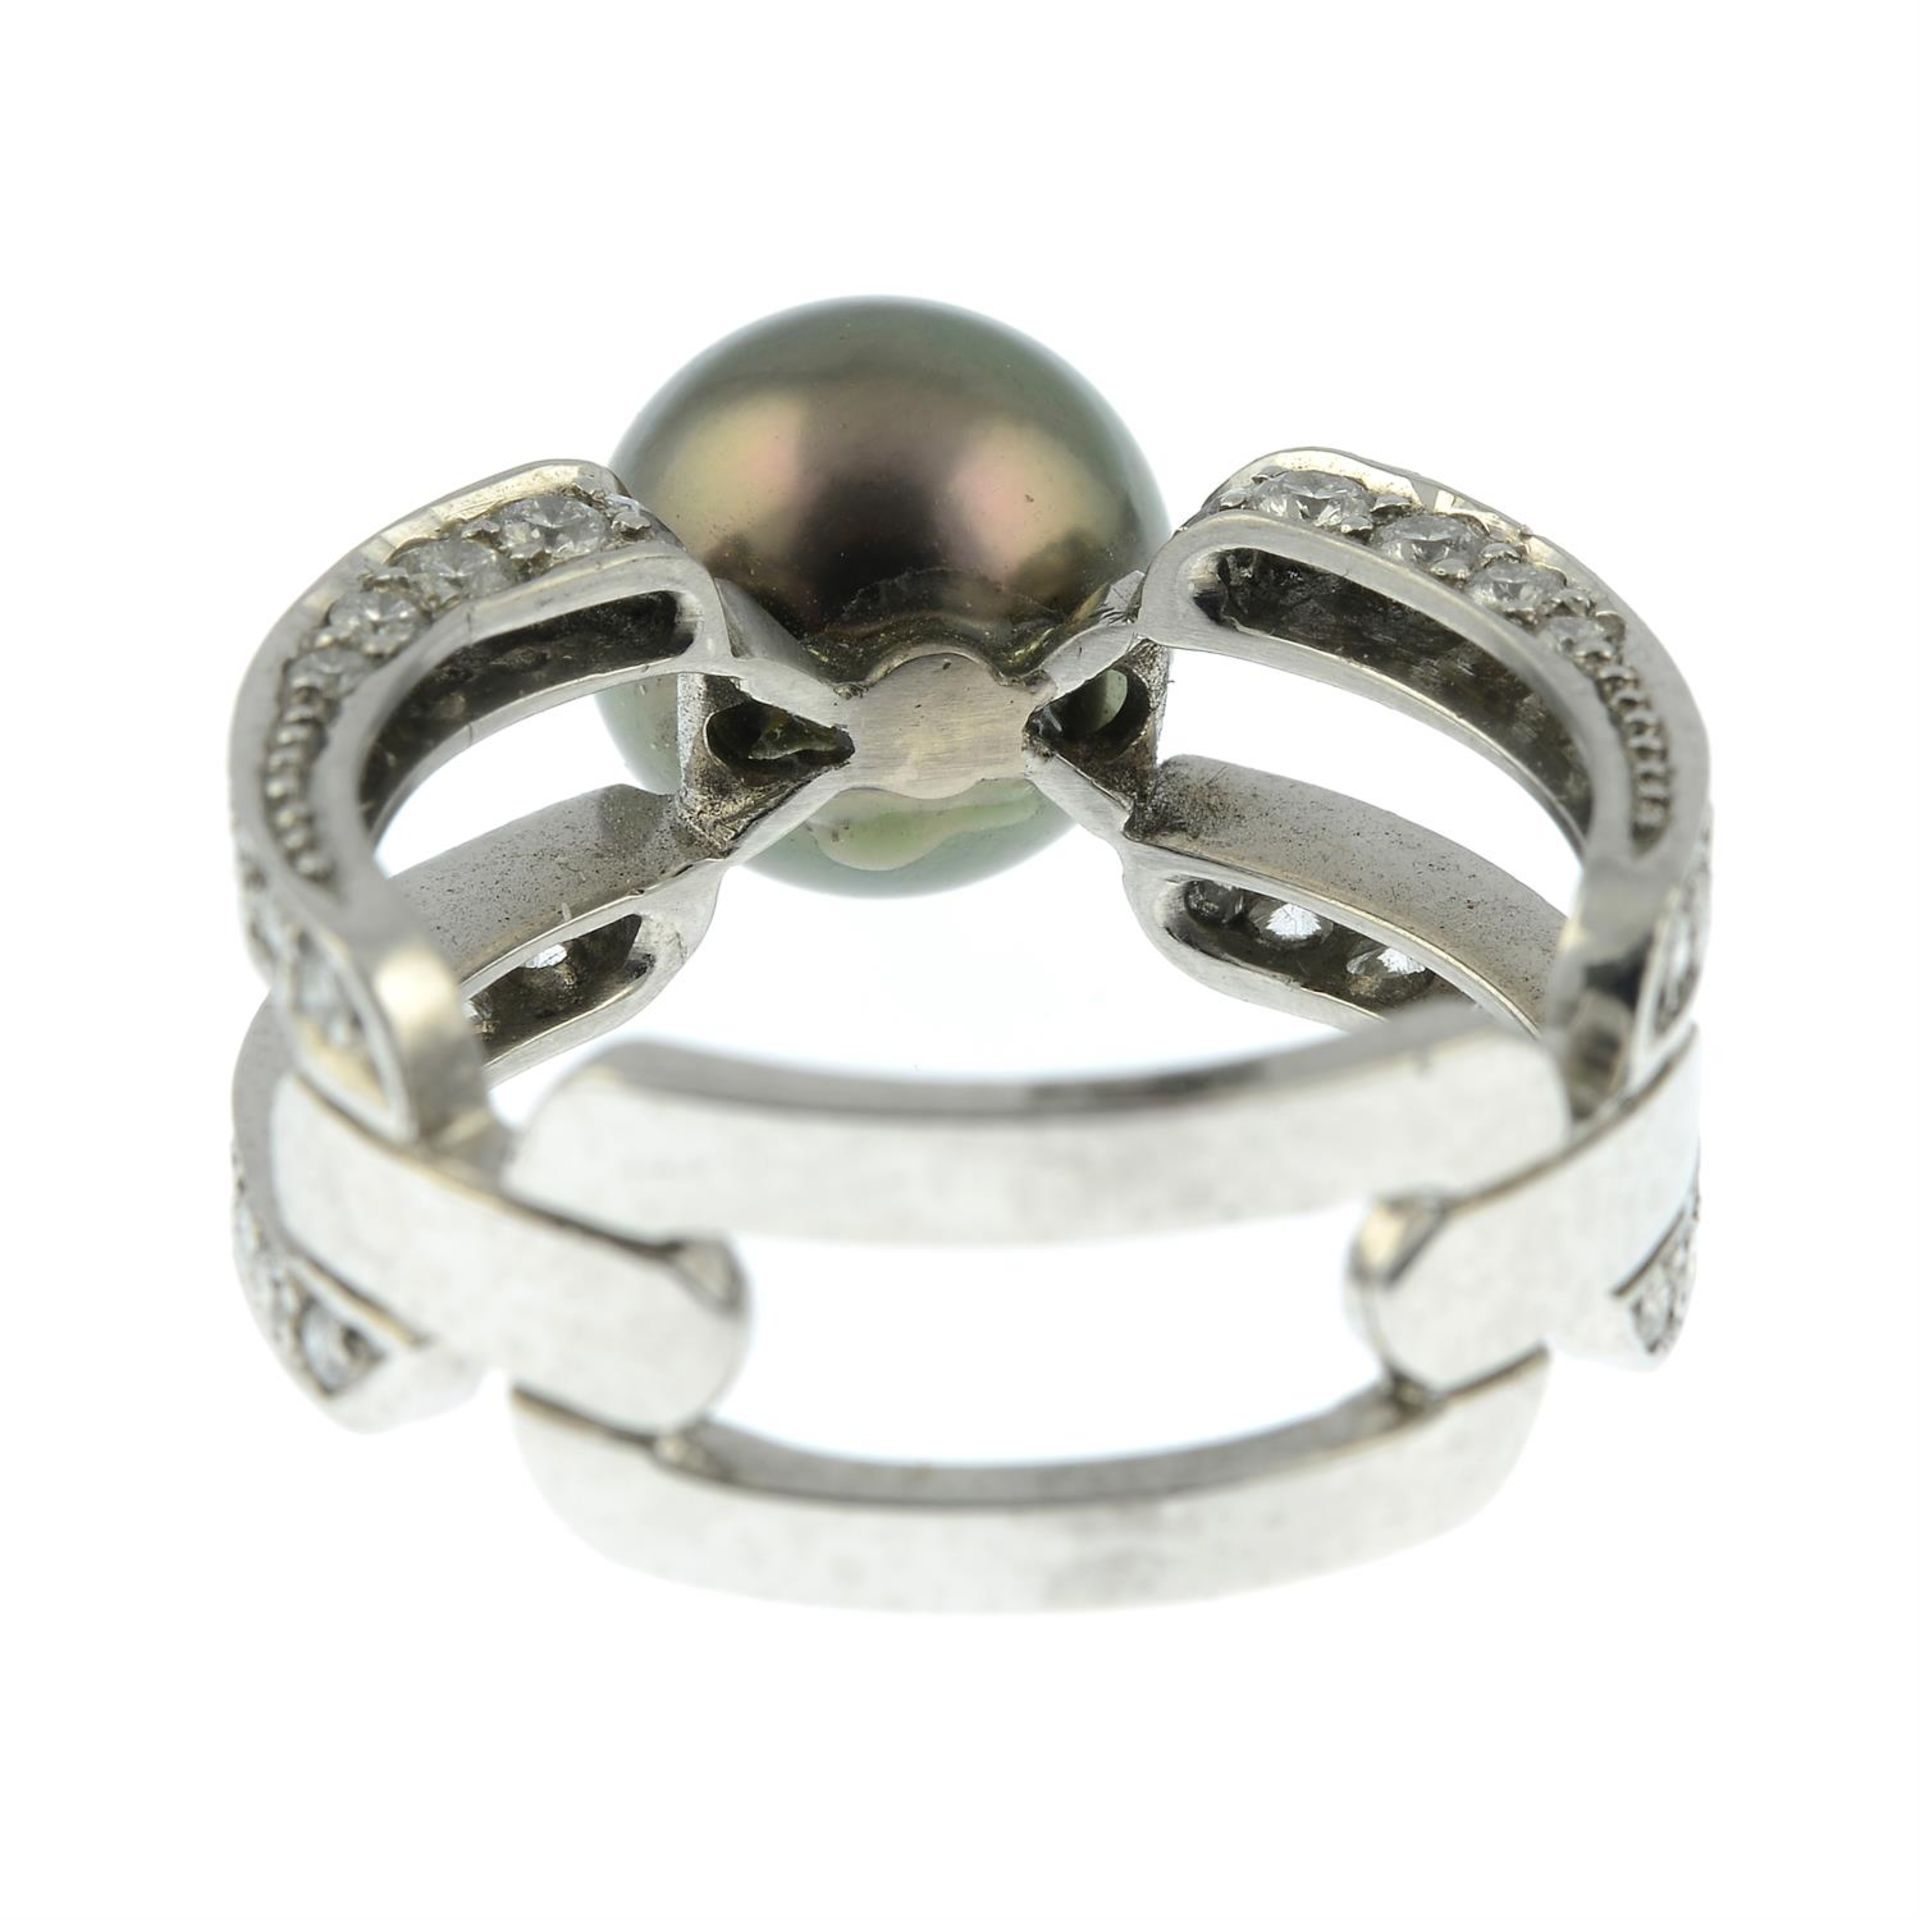 A platinum 'Black South Sea' cultured pearl and brilliant-cut diamond ring, by Mikimoto. - Image 4 of 6